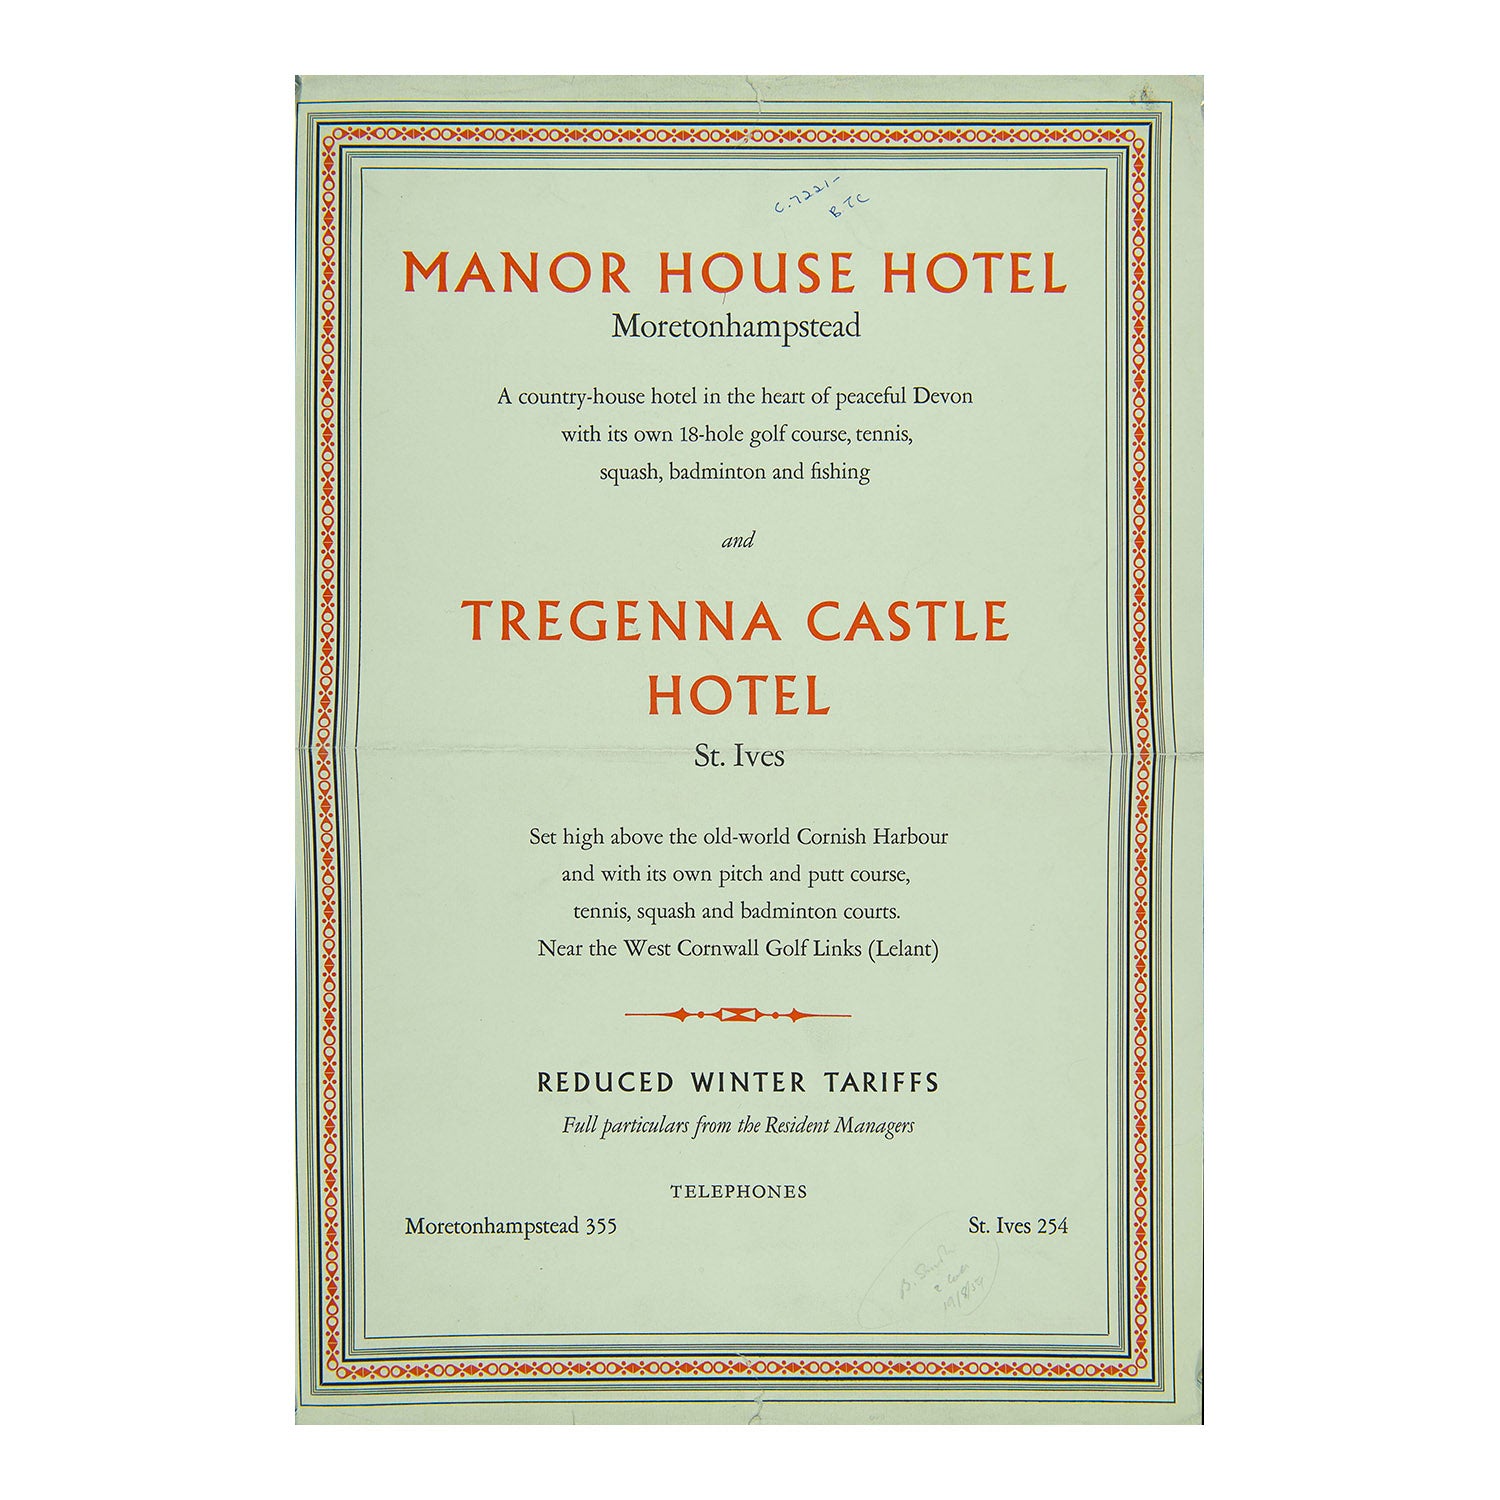 railway hotel poster, promoting the Manor House Hotel, Moretonhampstead, and Tregenna Castle Hotel, St. Ives, 1959